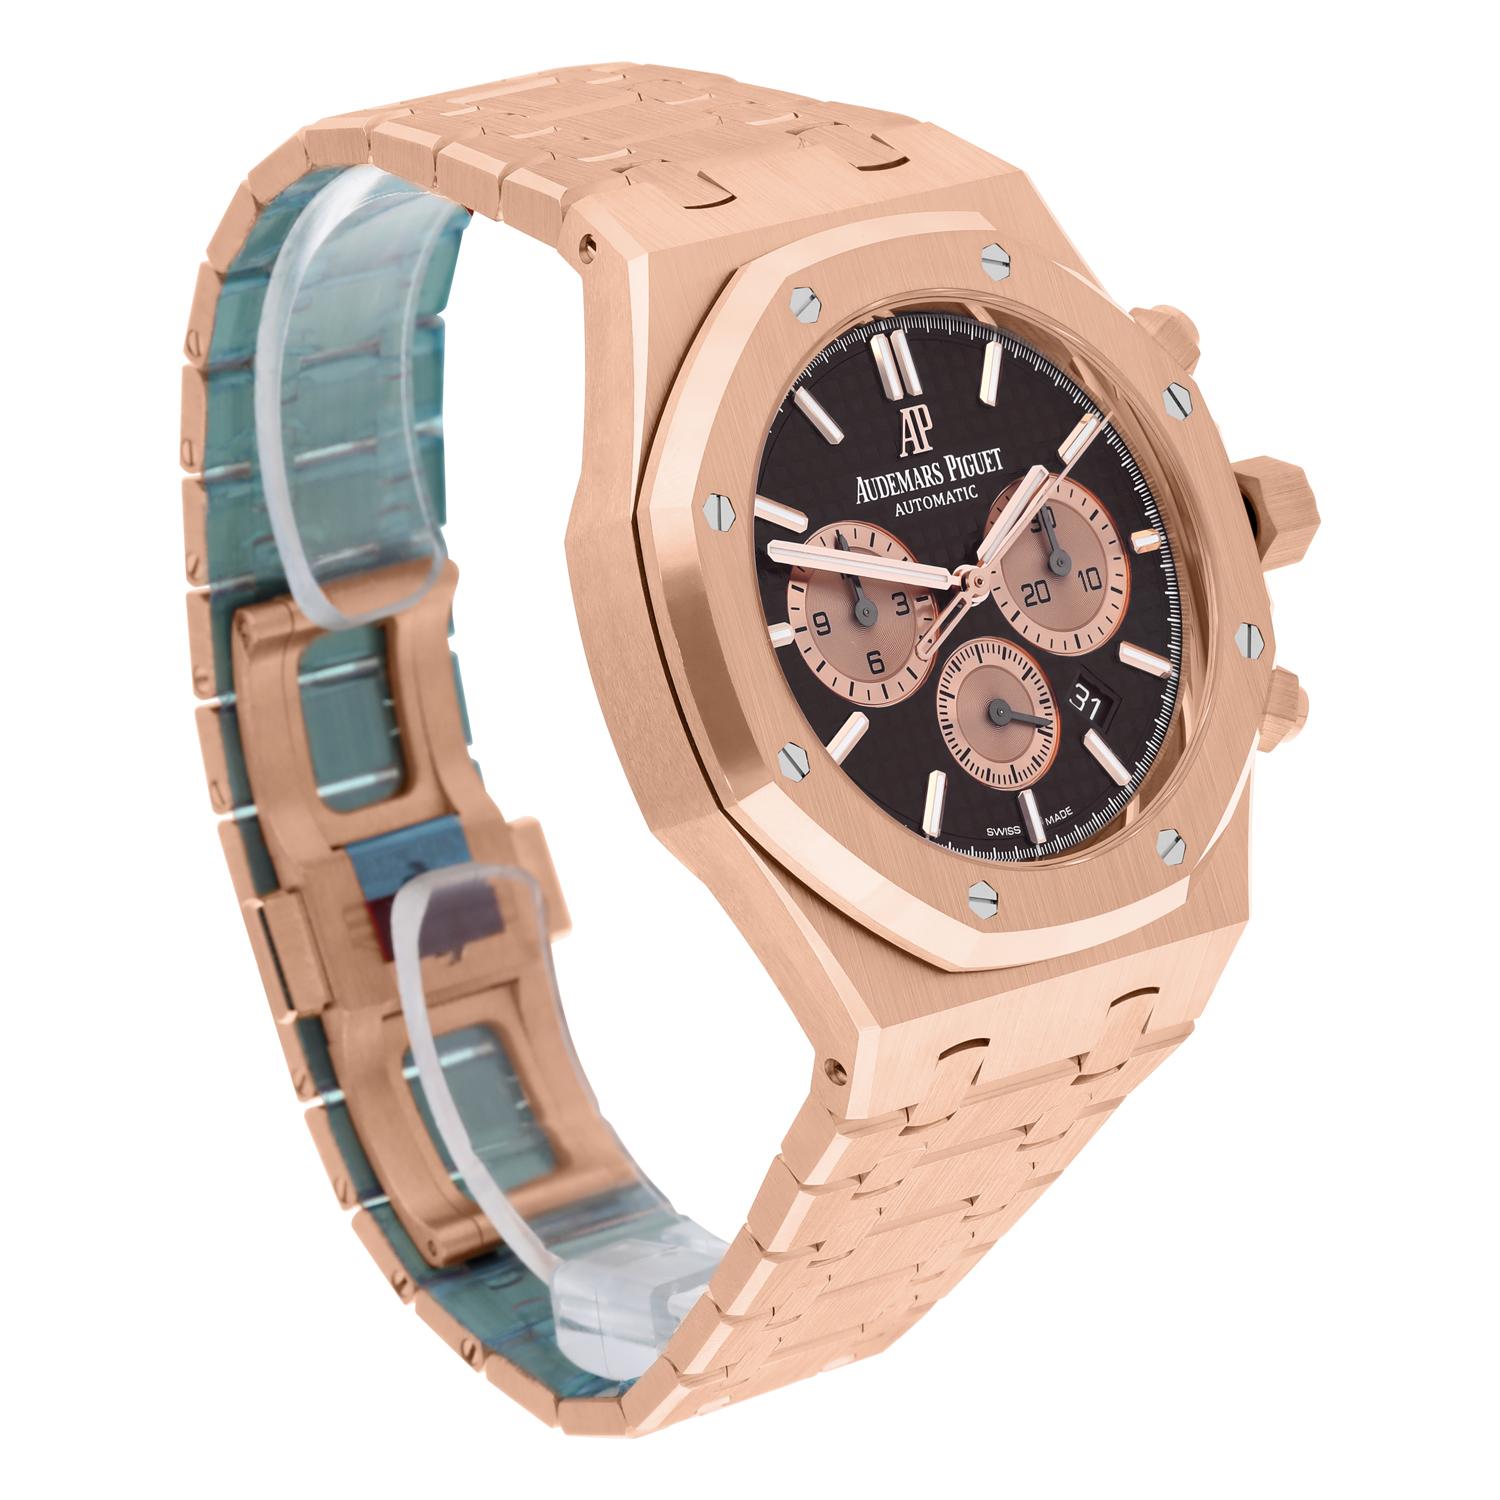 Modern Audemars Piguet Royal Oak Chronograph Chocolate 26331OR.OO.1220OR.02 NEW For Sale